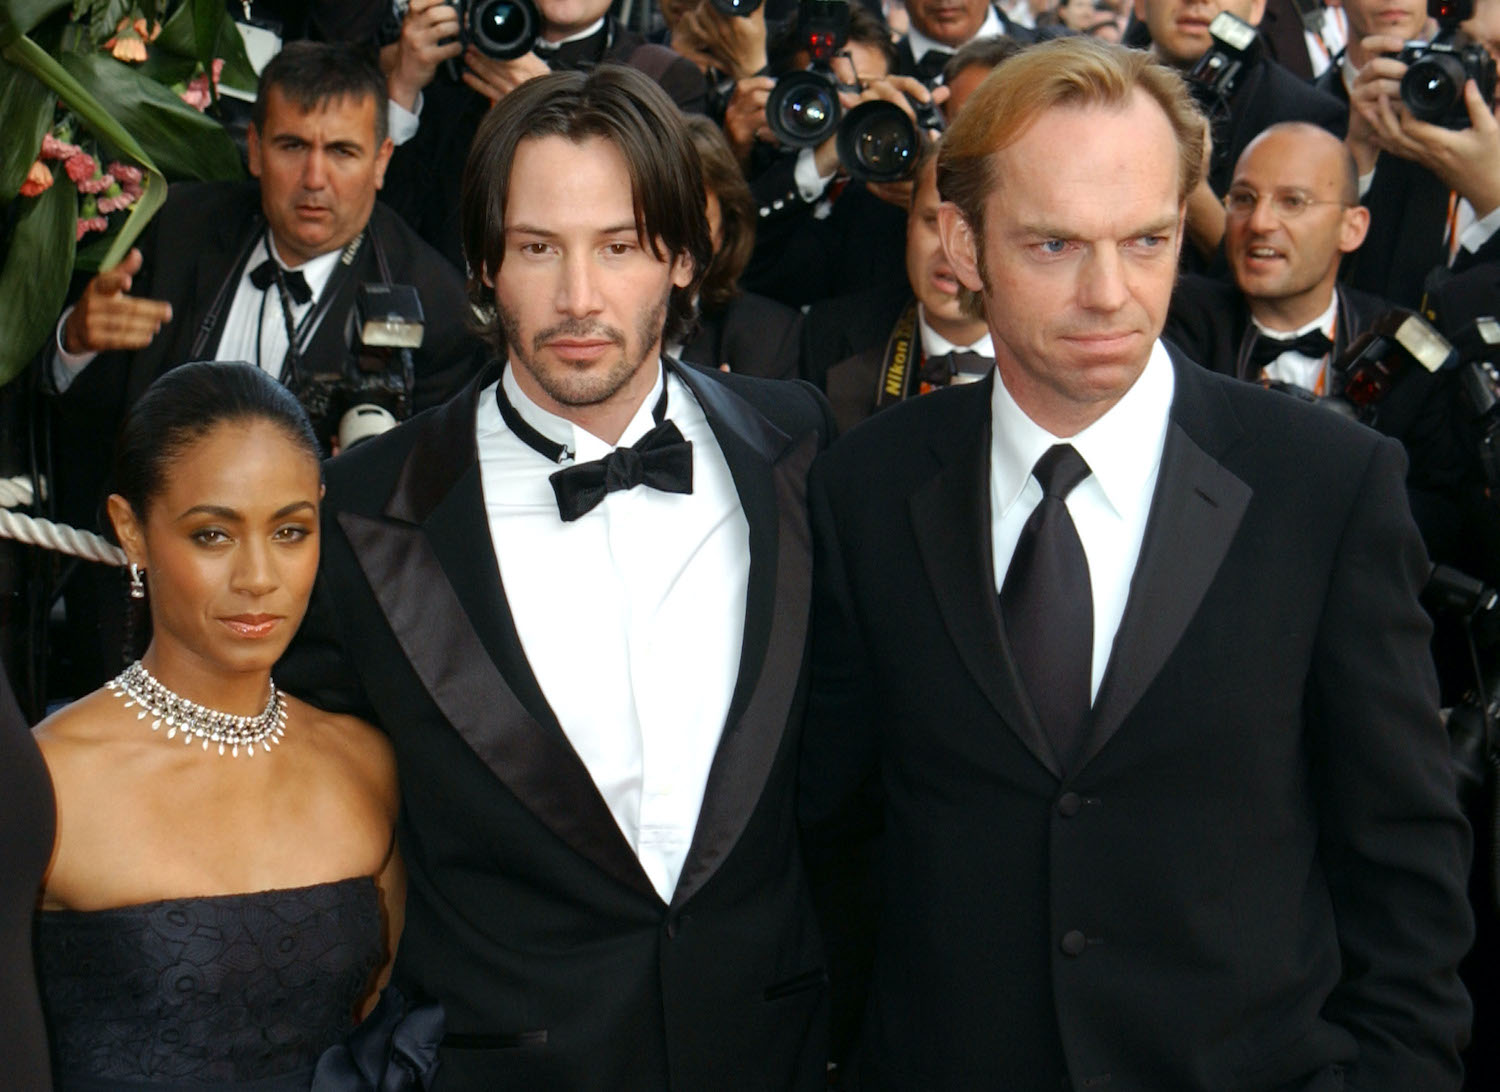 Jada Pinkett Smith, Keanu Reeves, and Hugo Weaving at 2003 Cannes Film Festival 'The Matrix Reloaded' Premiere